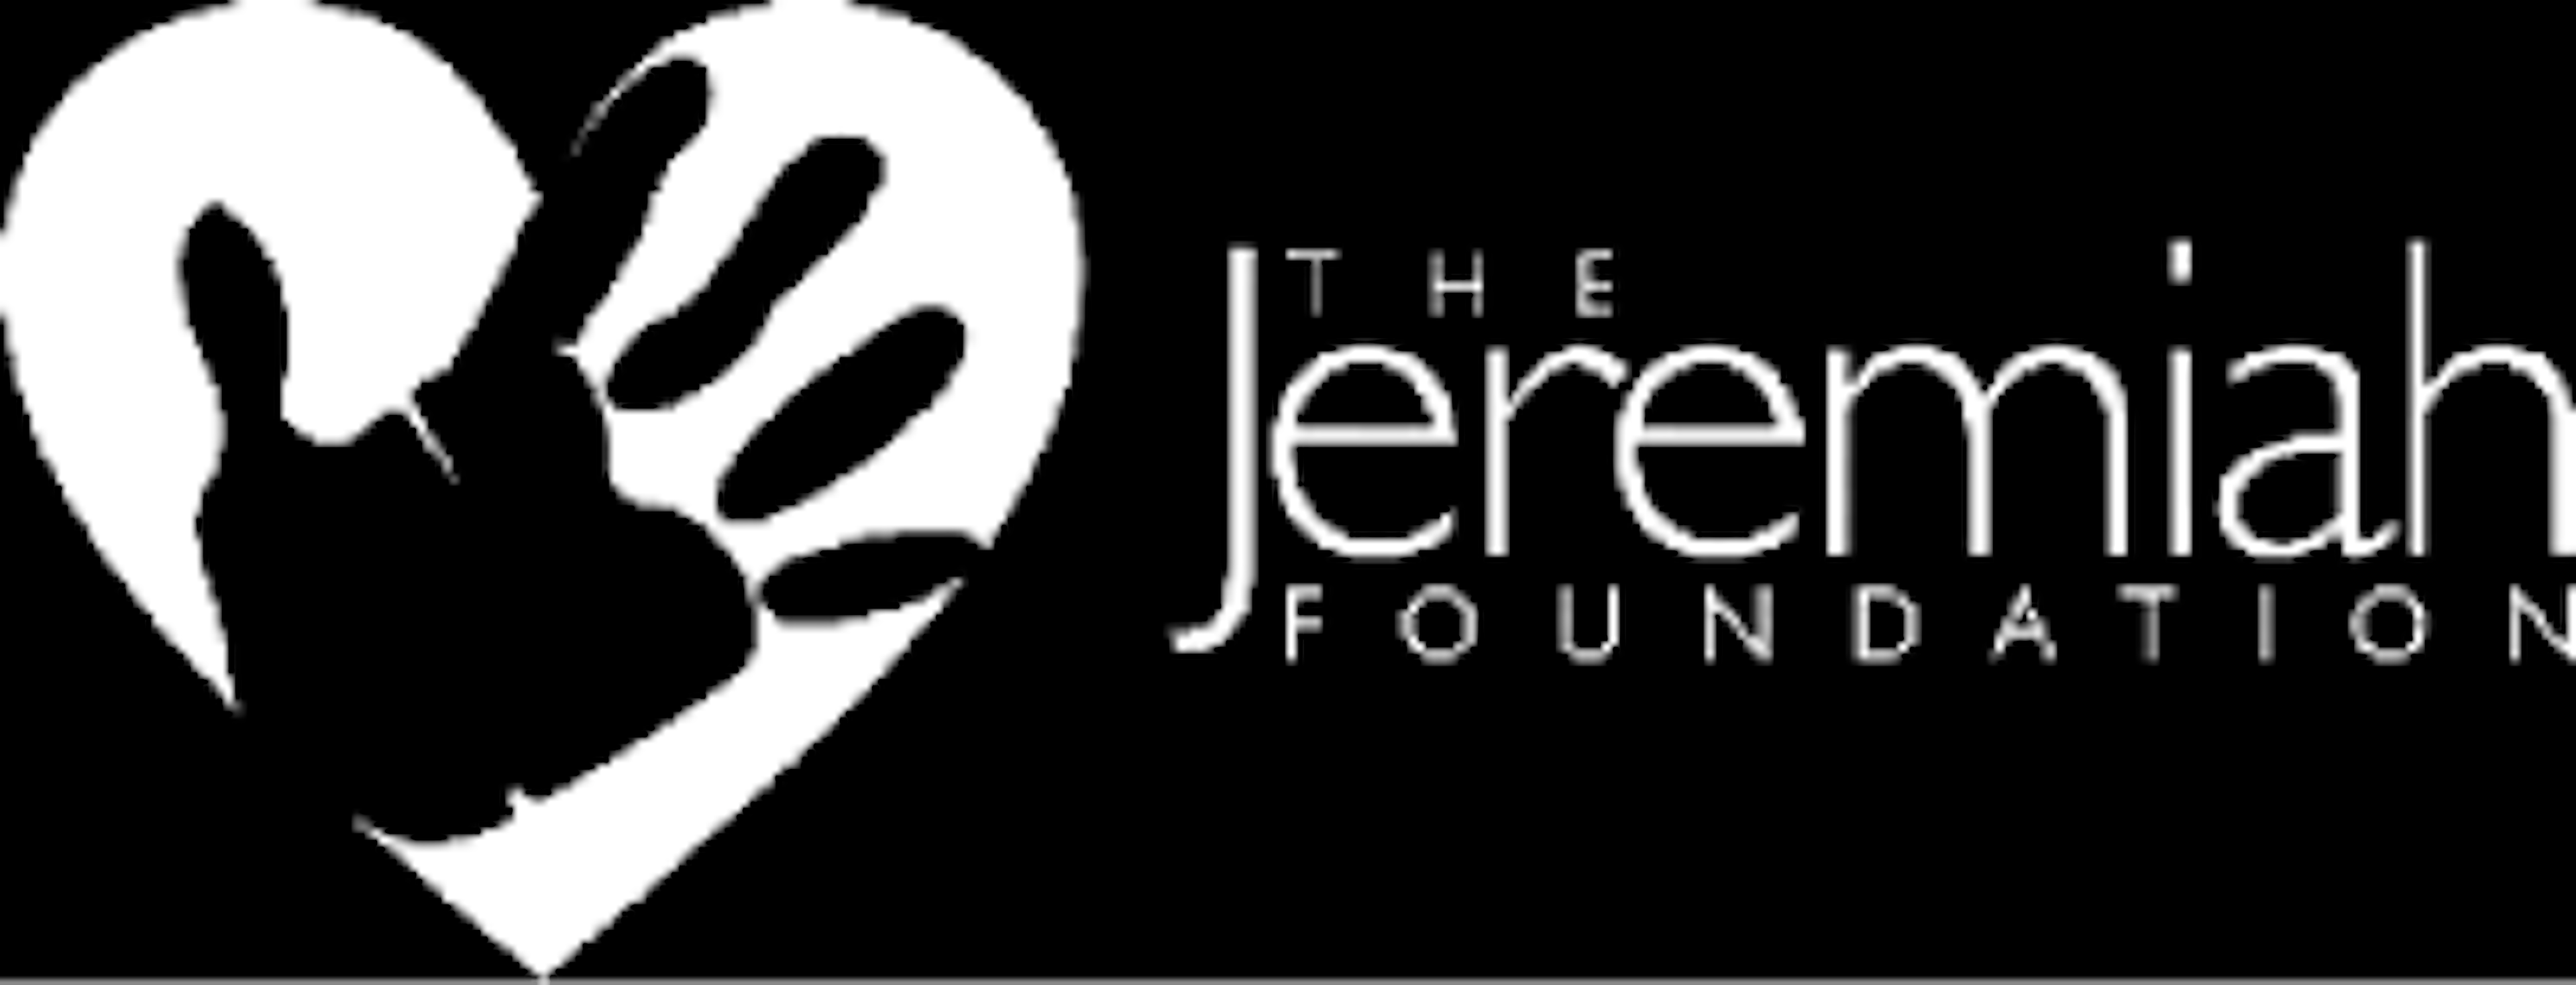 Jeremiah-Foundation.png